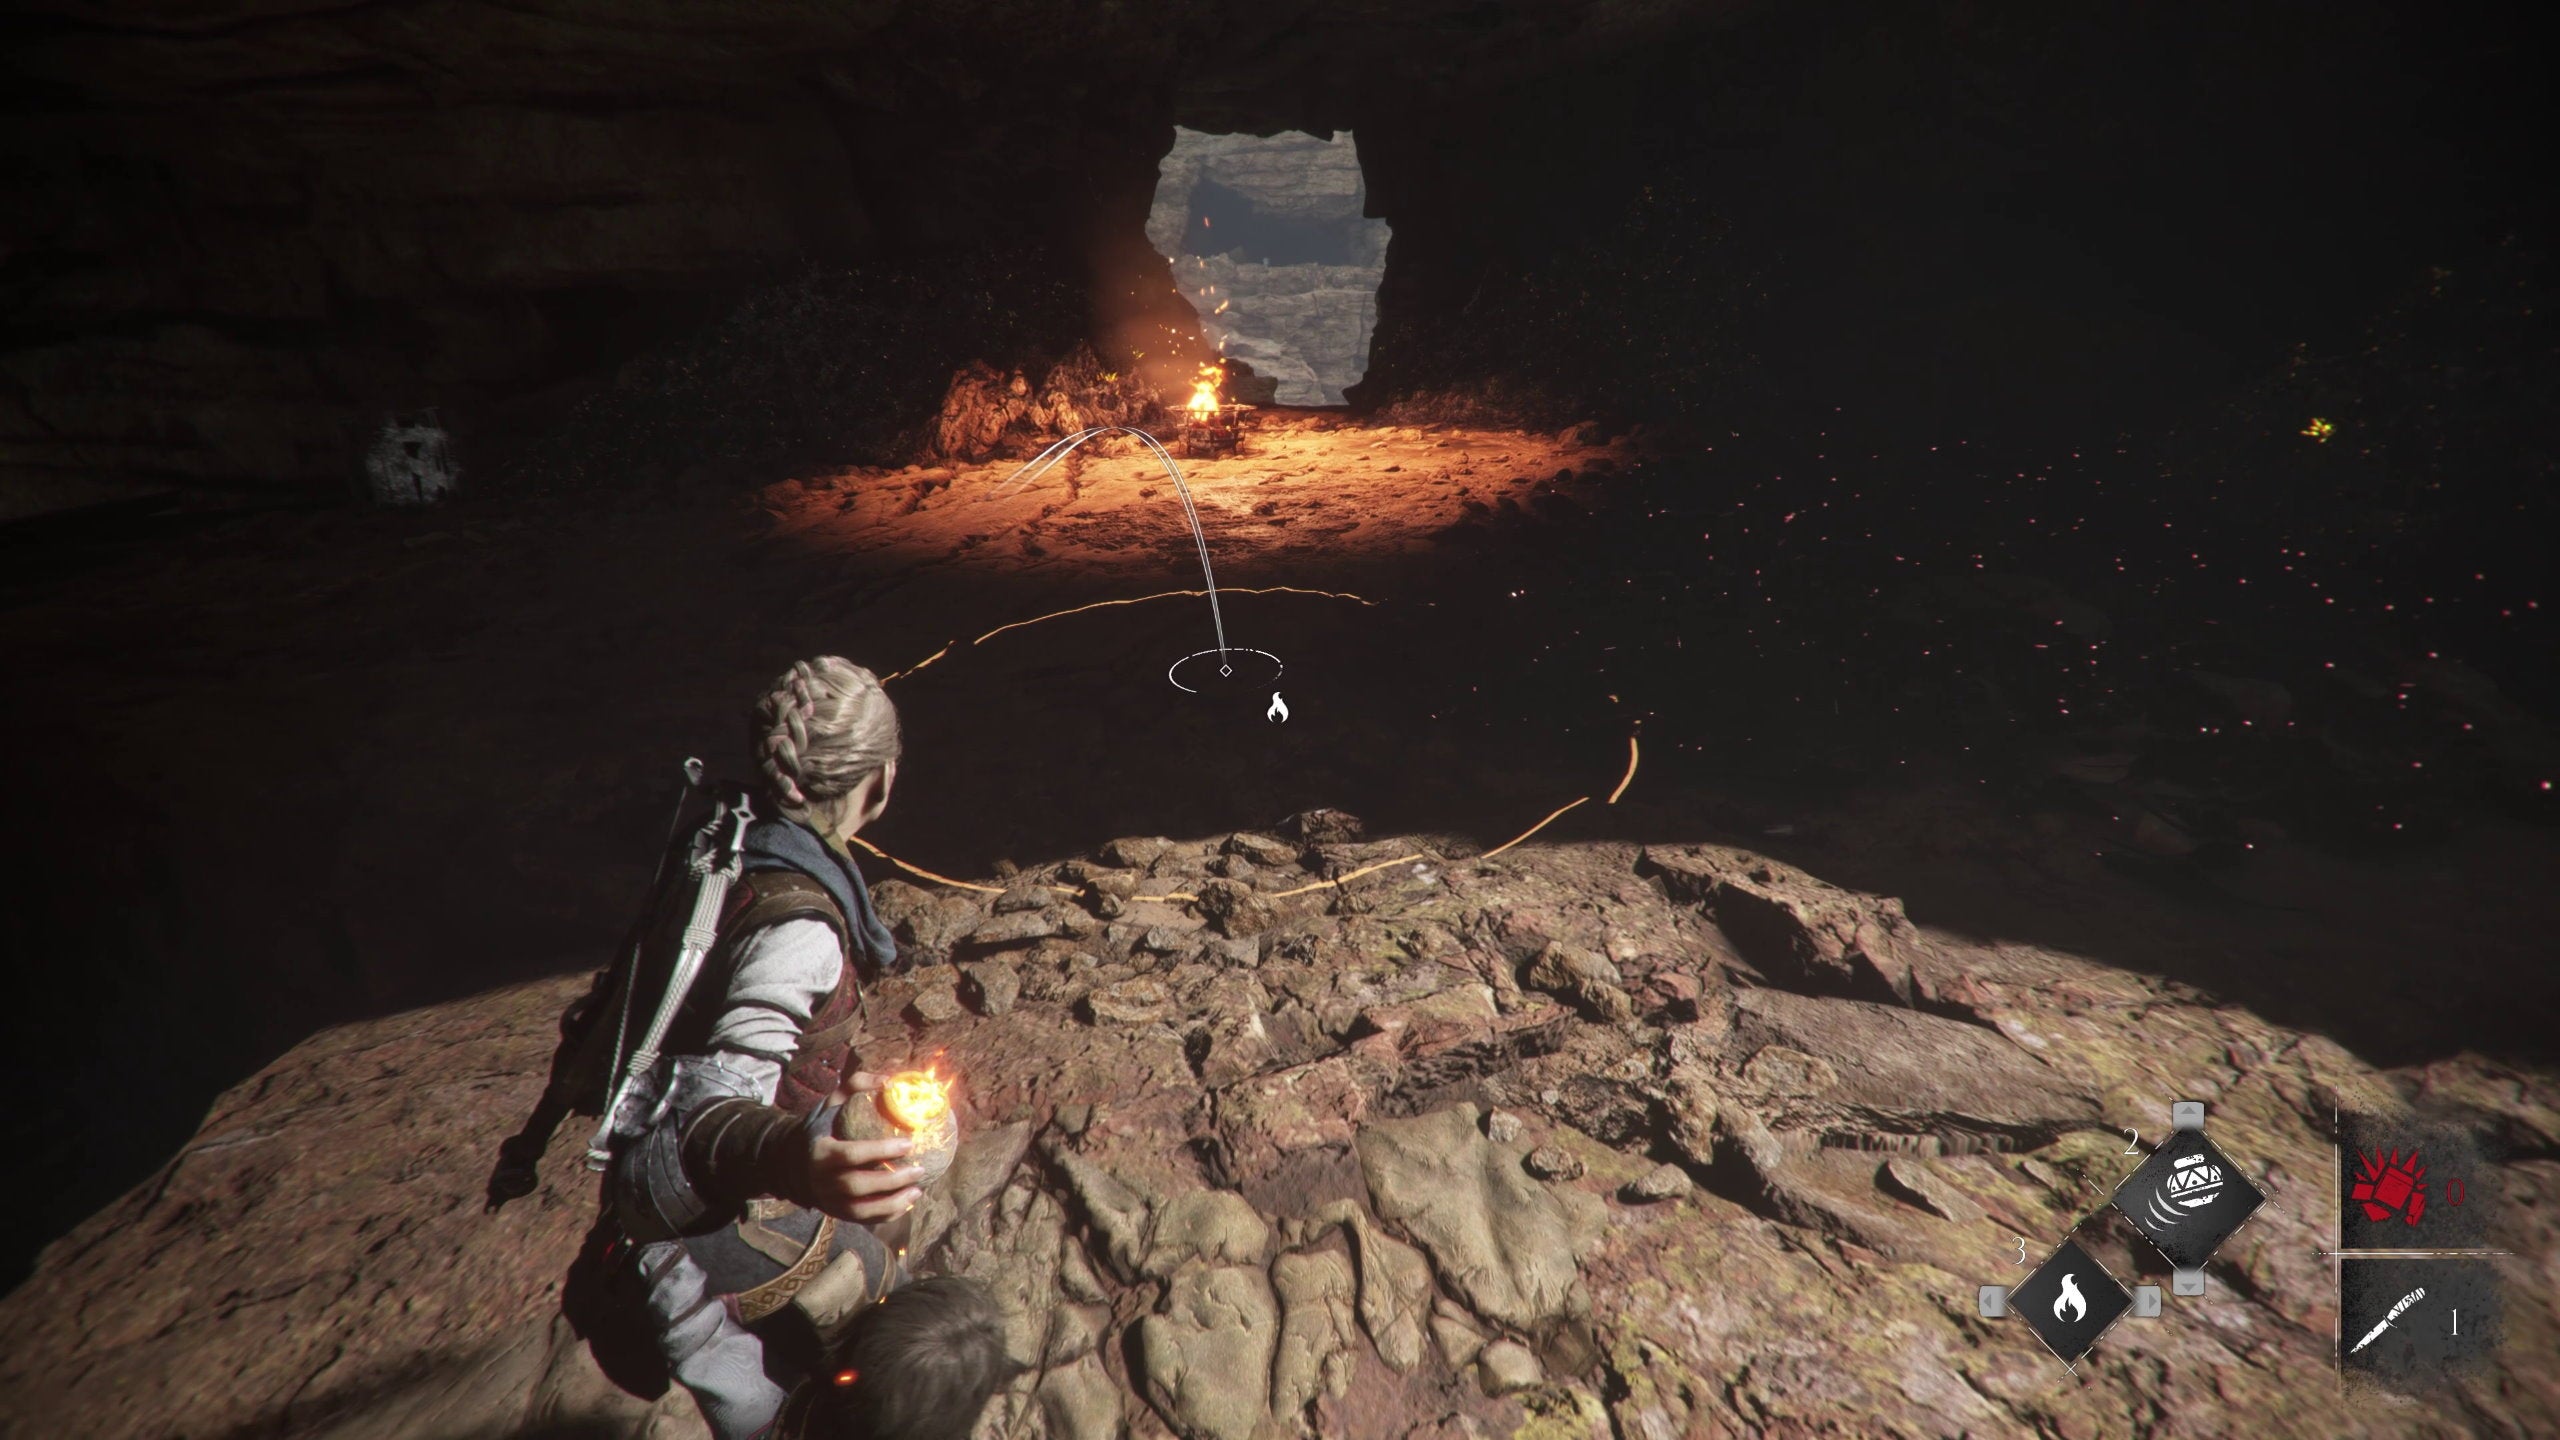 A young girl prepares to throw a flaming post inside a cave in A Plague Tale Requiem